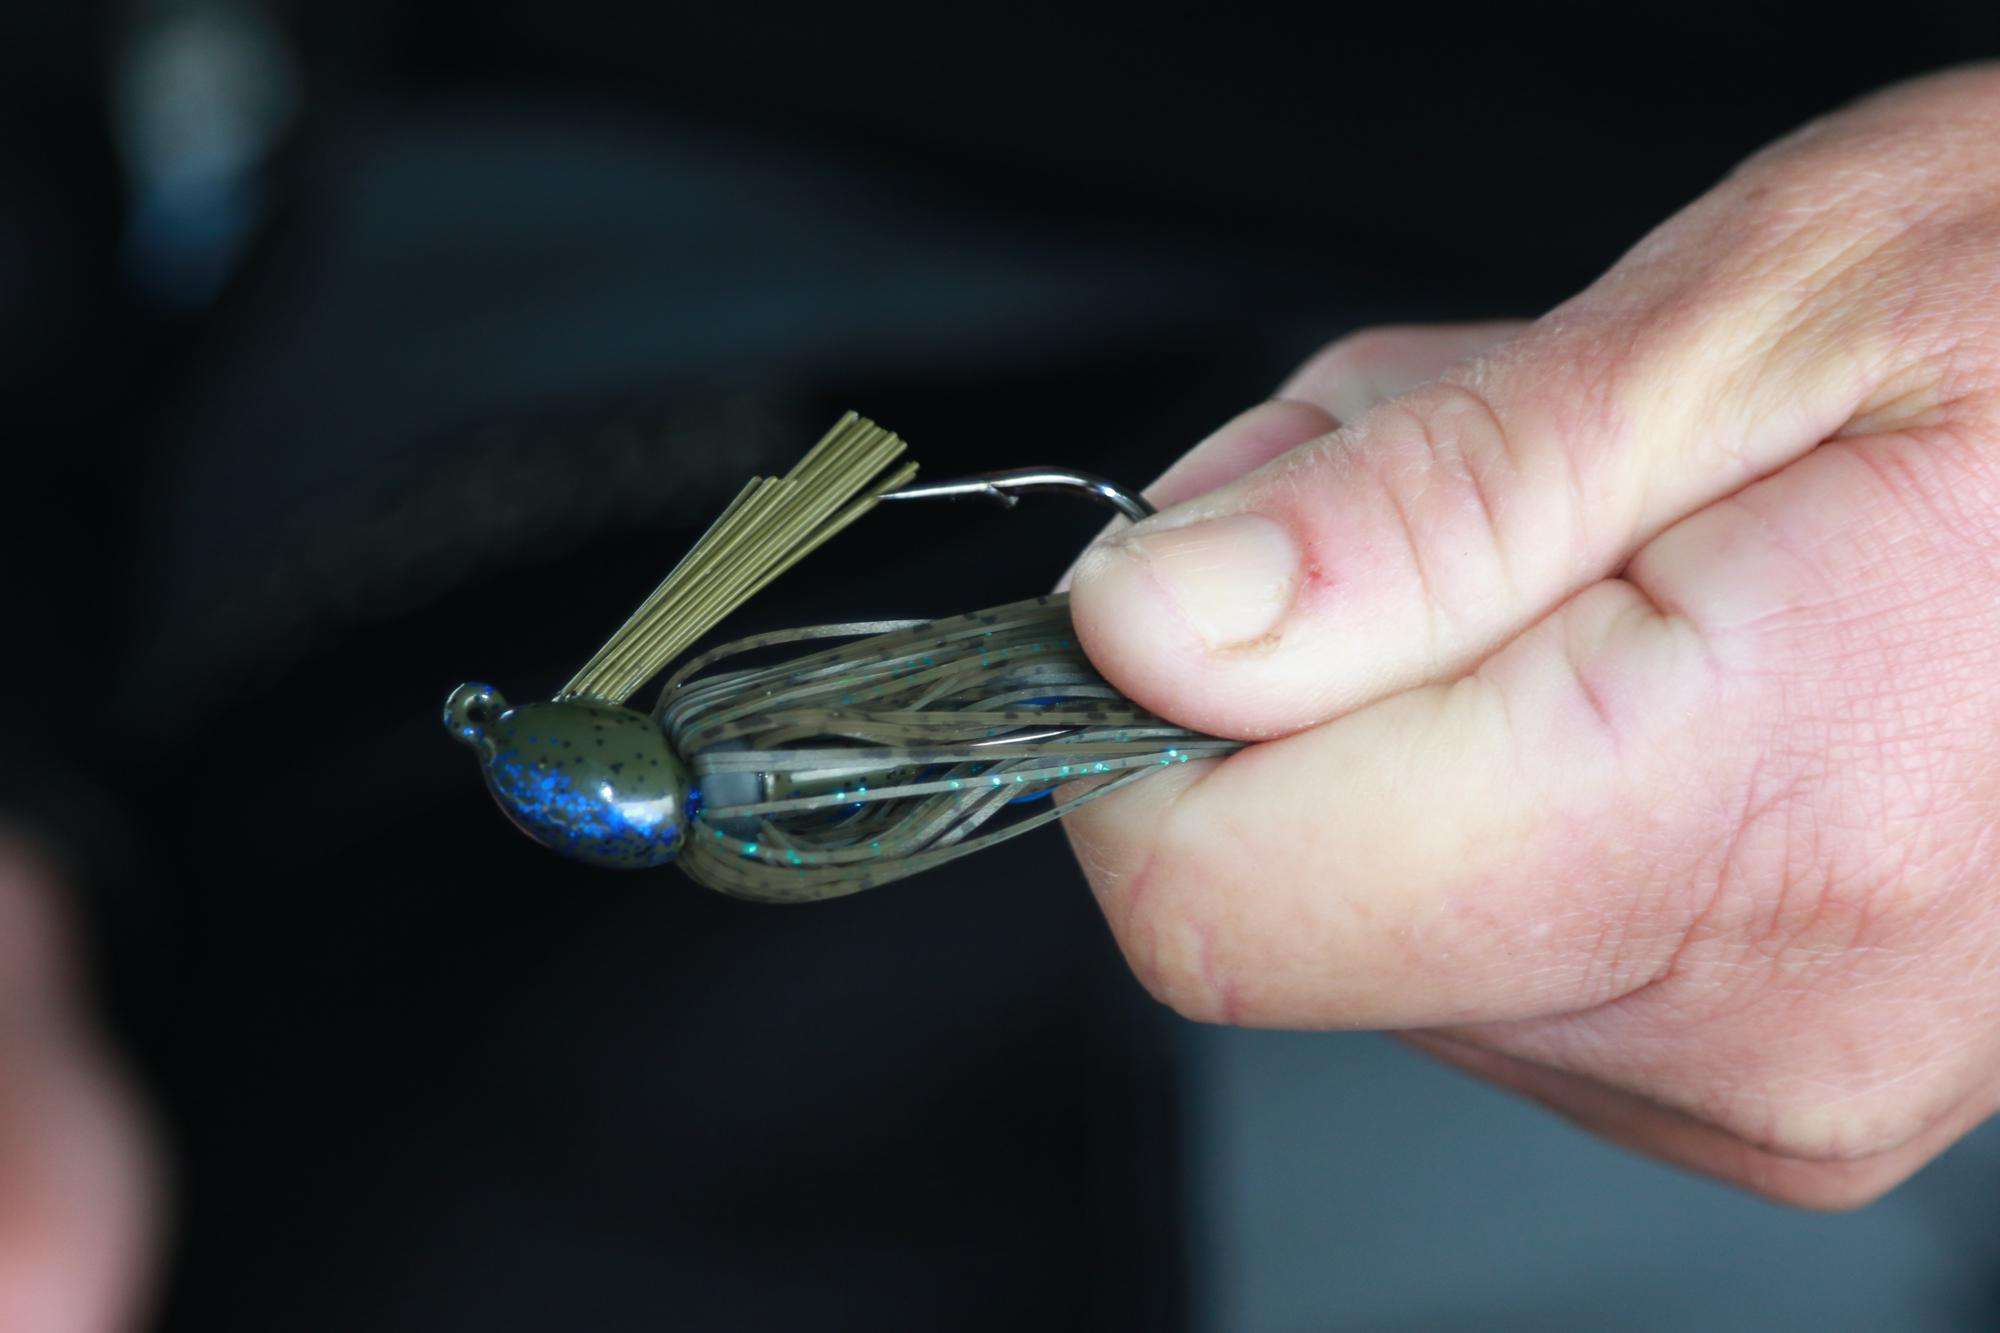 He likes his jig skirts to extend no more than a half inch below the hook bend. To neatly trim the skirt, he gathers all the fibers and pinches them against the hook.